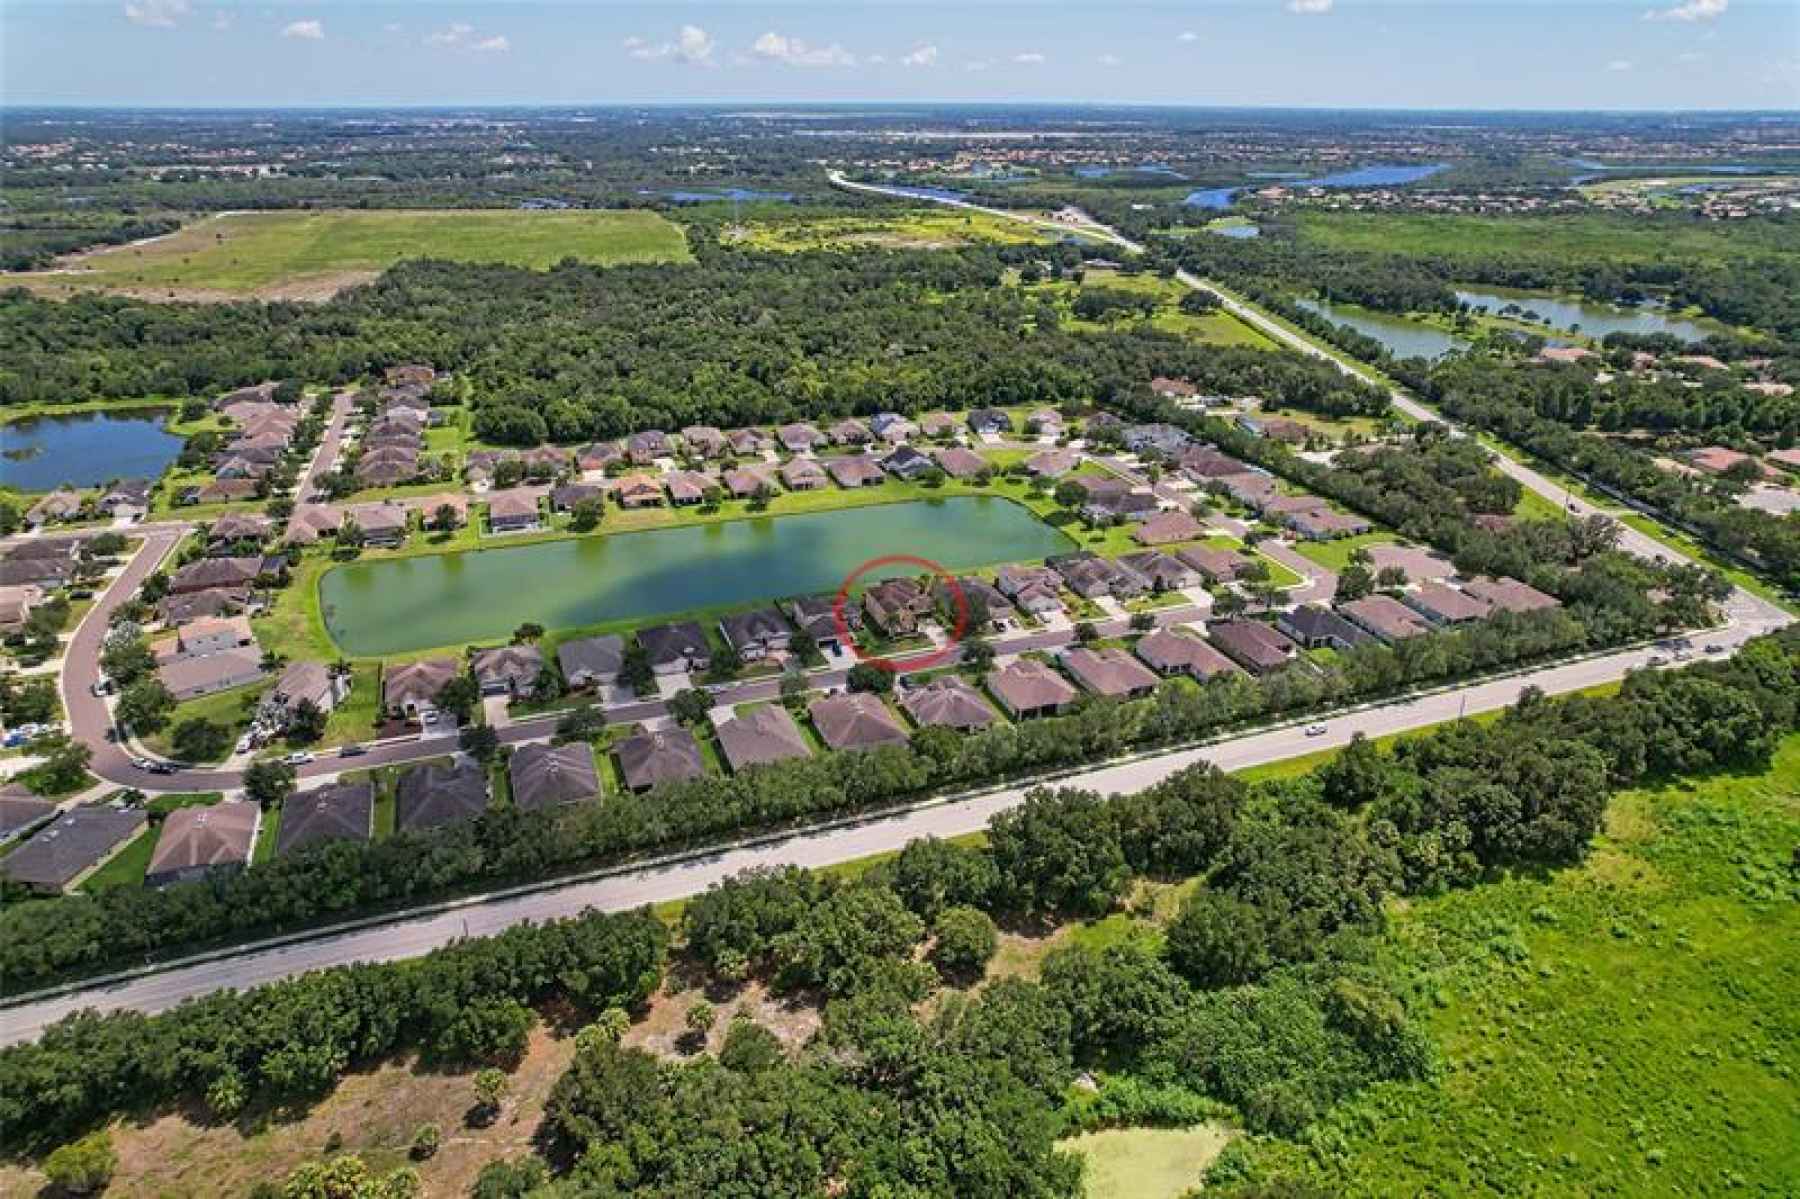 Aerial View of Home, Lake, and Manatee River in the background.